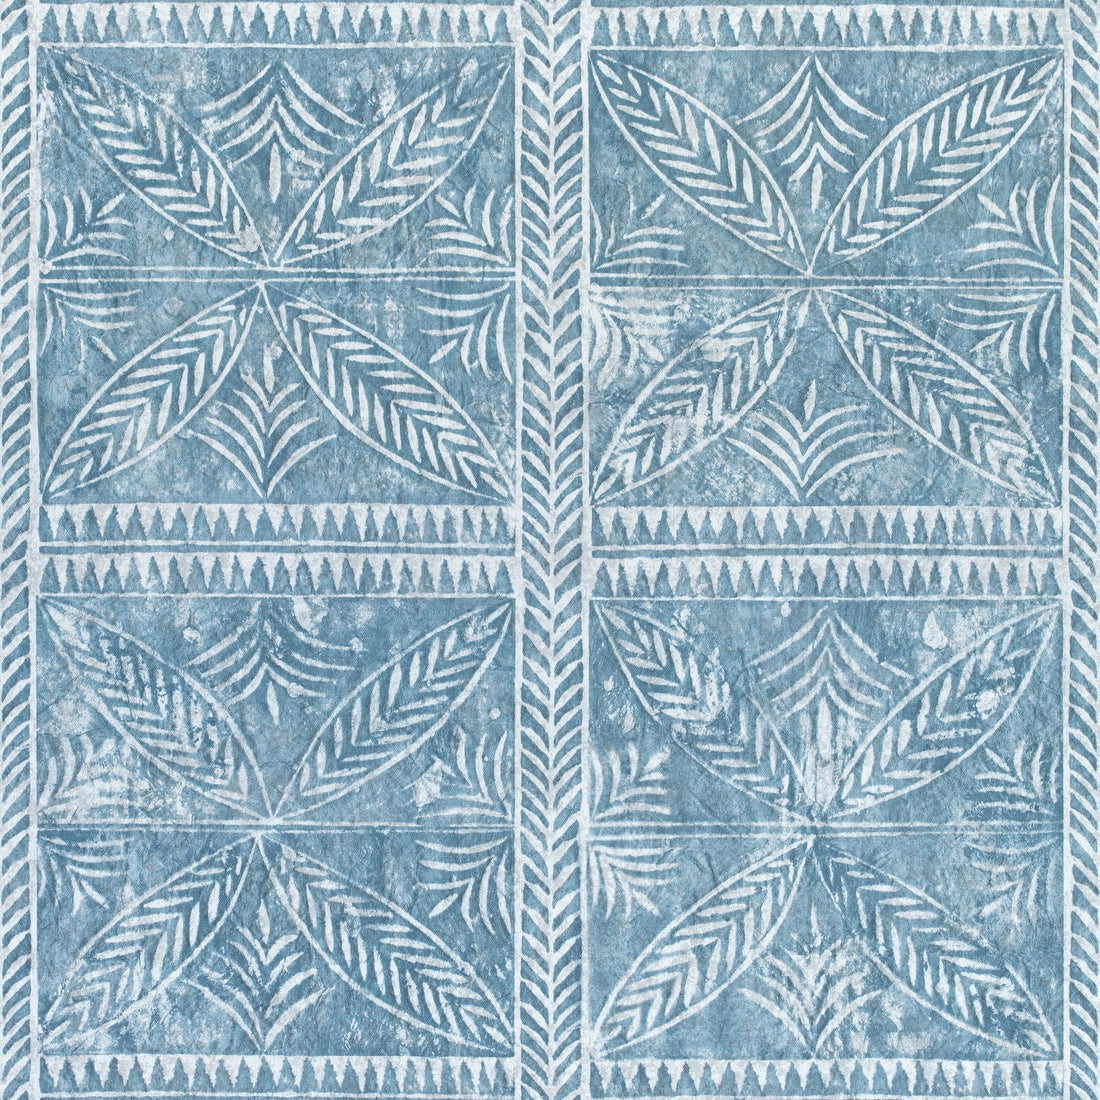 Timbuktu fabric in slate blue color - pattern number F910254 - by Thibaut in the Colony collection